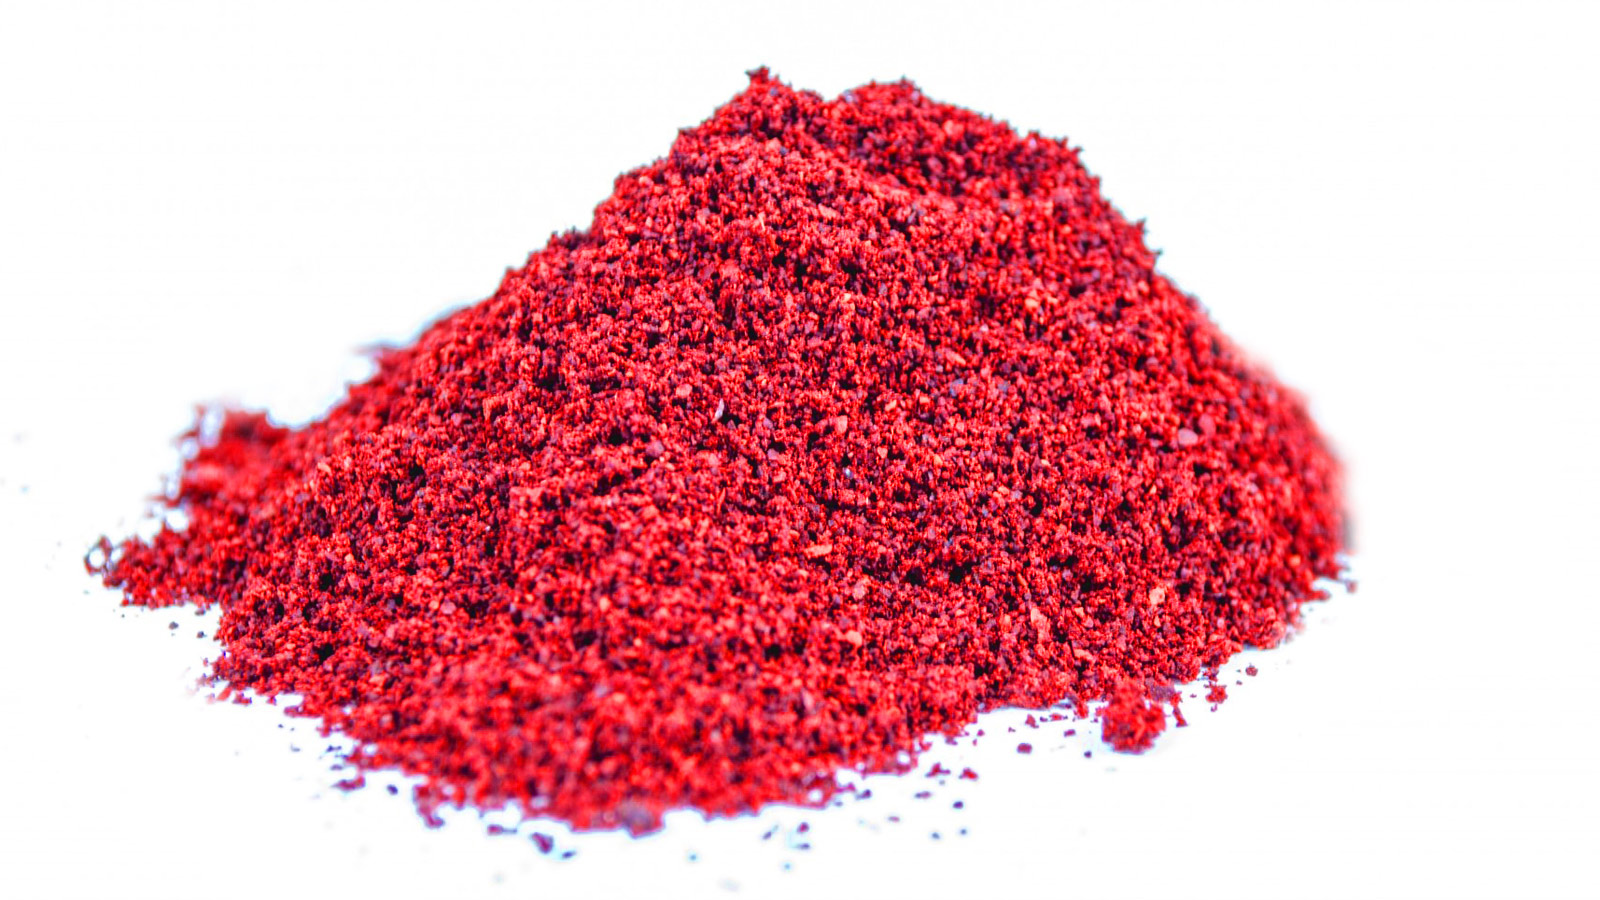 eloxal farbe rot anodising dye red colorante anodizzare rojo anodisation rouge anodizado